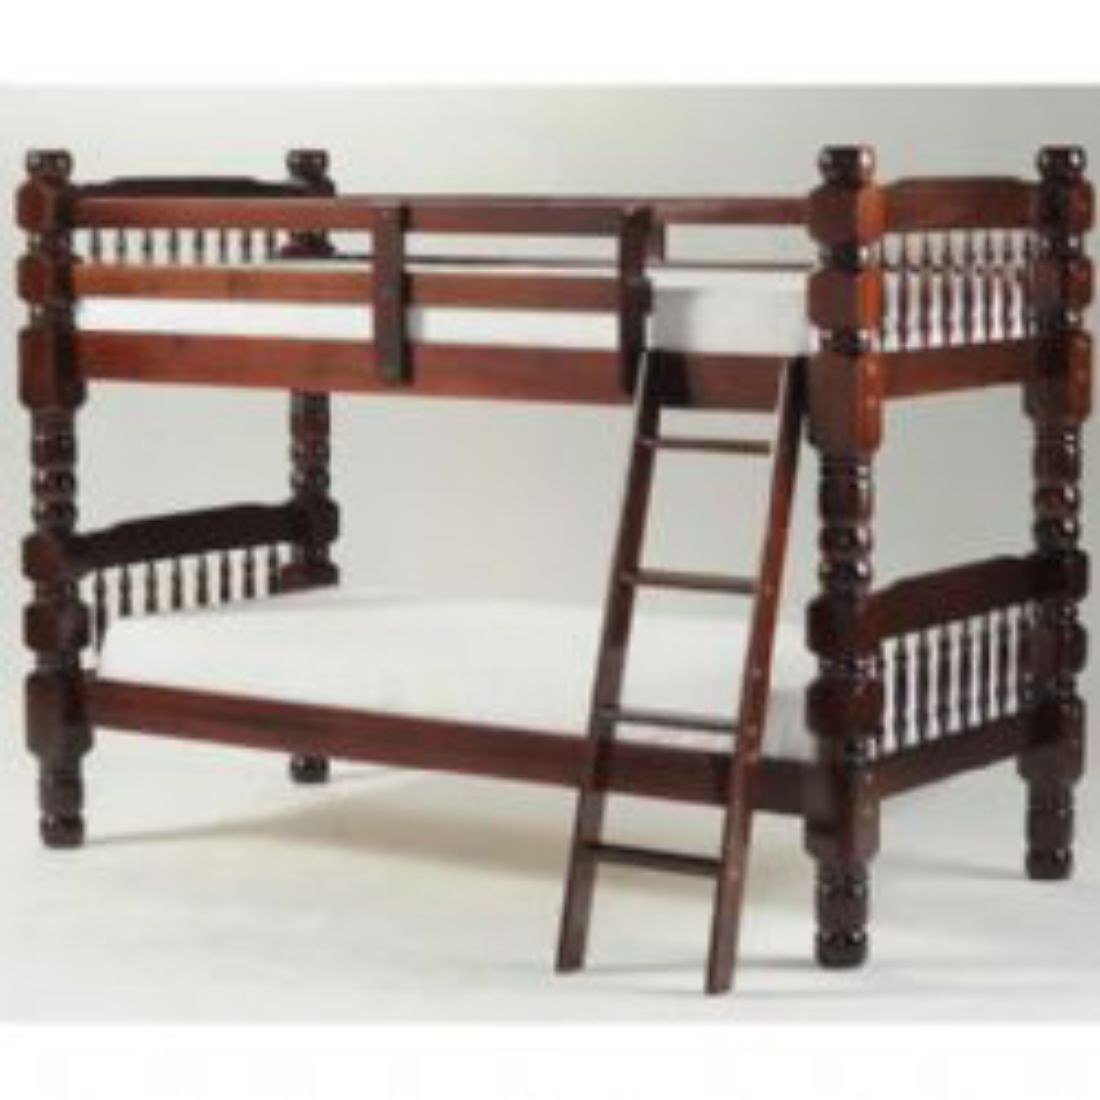 ... to fit Meir children's chunky bunk beds - mattress size is 190 x 90 cm